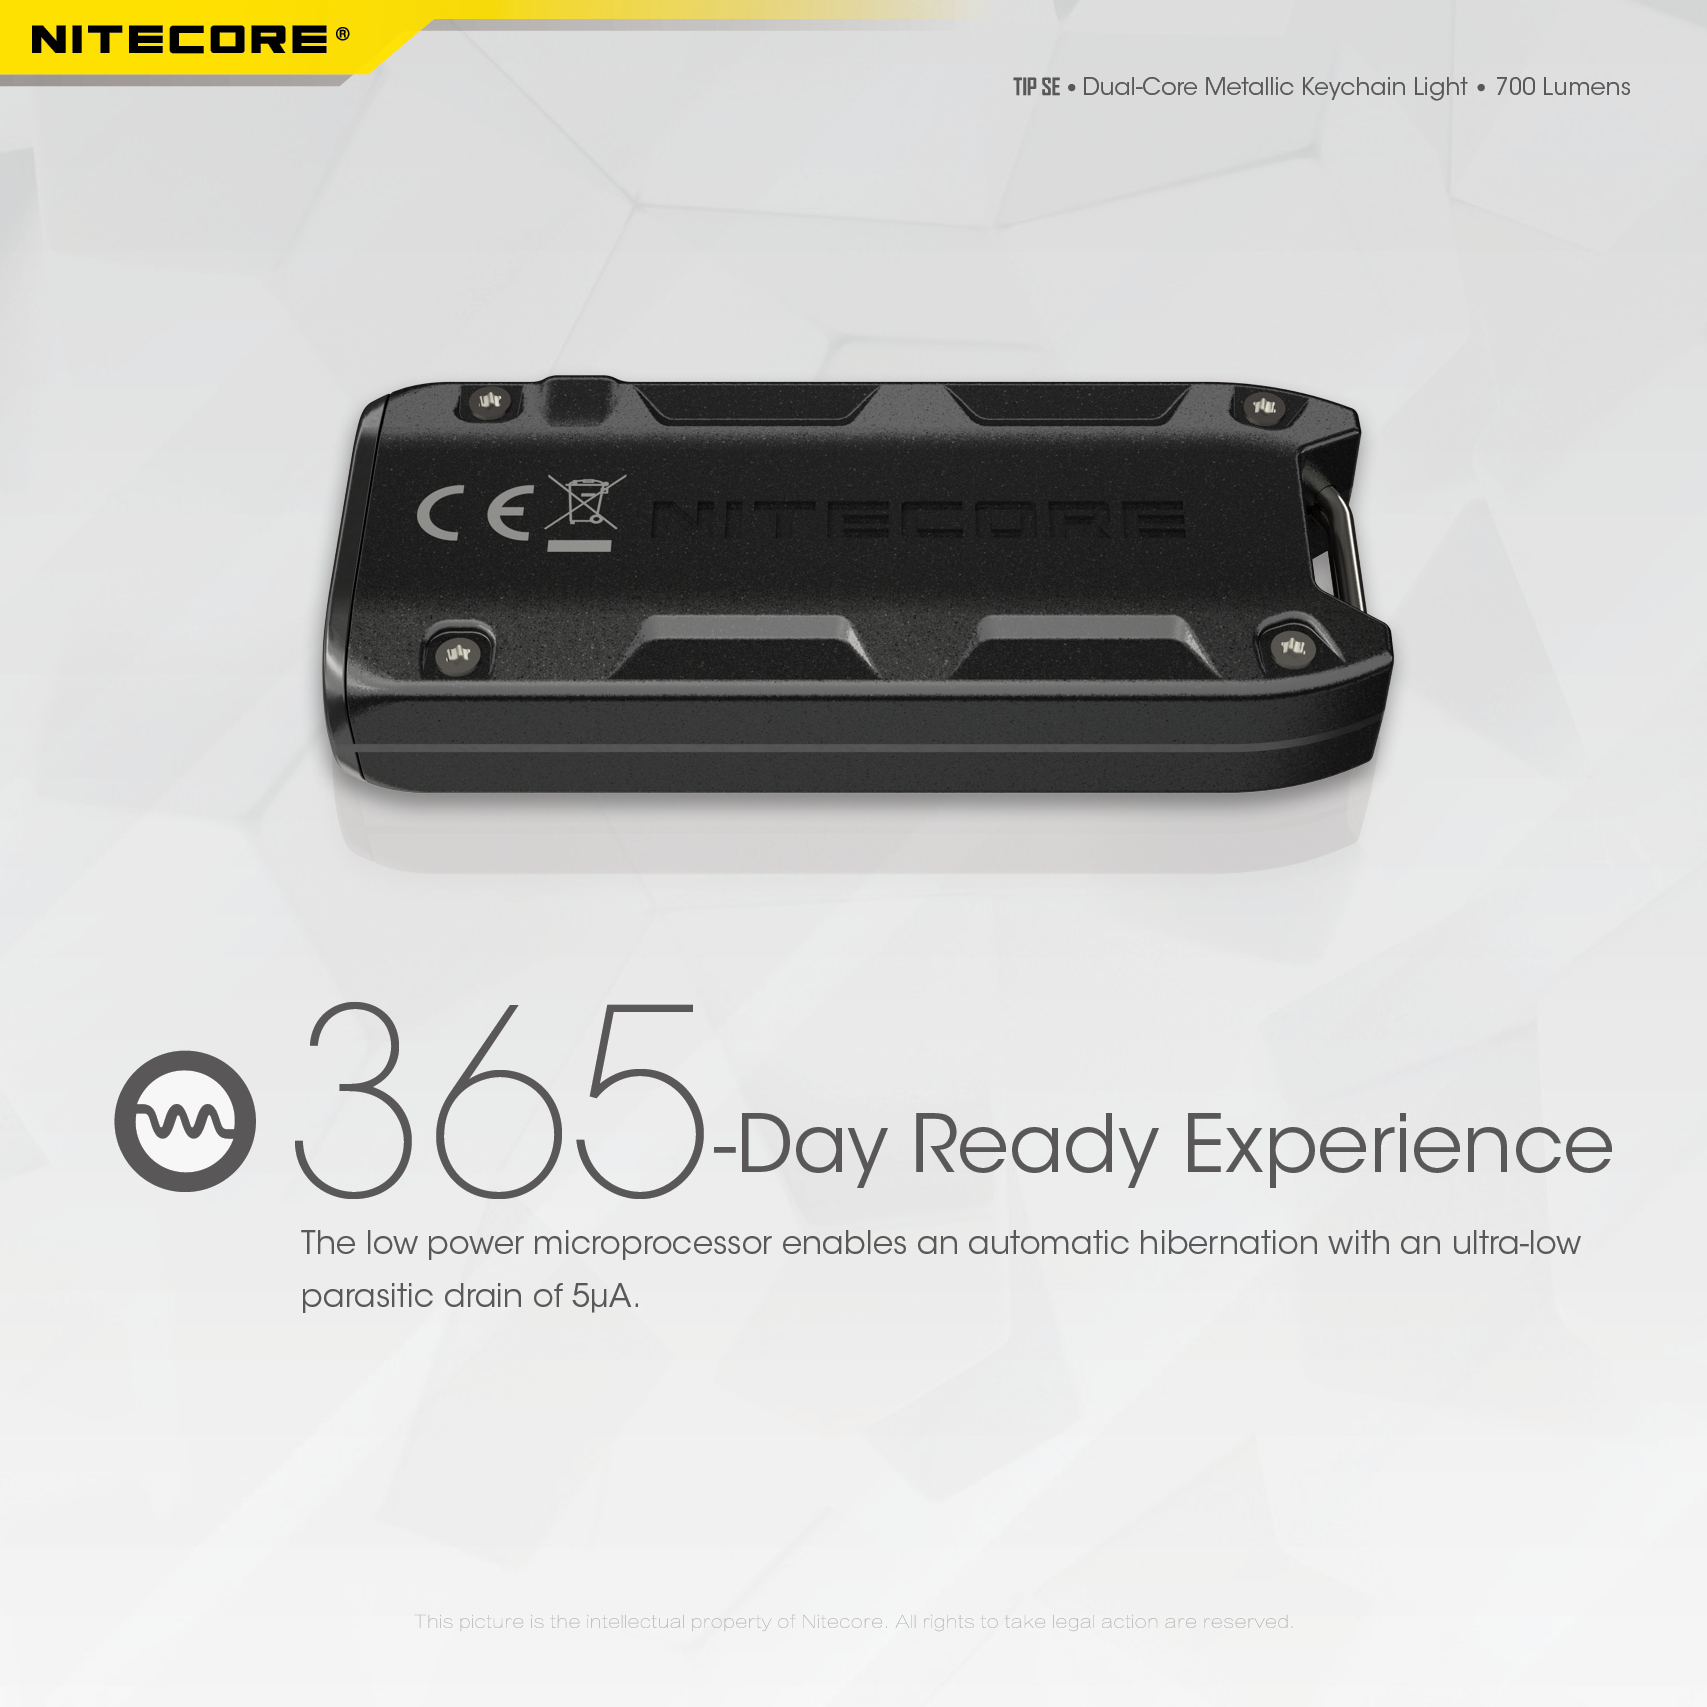 NITECORE-TIP-SE-700LM-P8-Dual-Light-LED-Keychain-Flashlight-Type-C-Rechargeable-QC-Every-Day-Carry-M-1976045-8